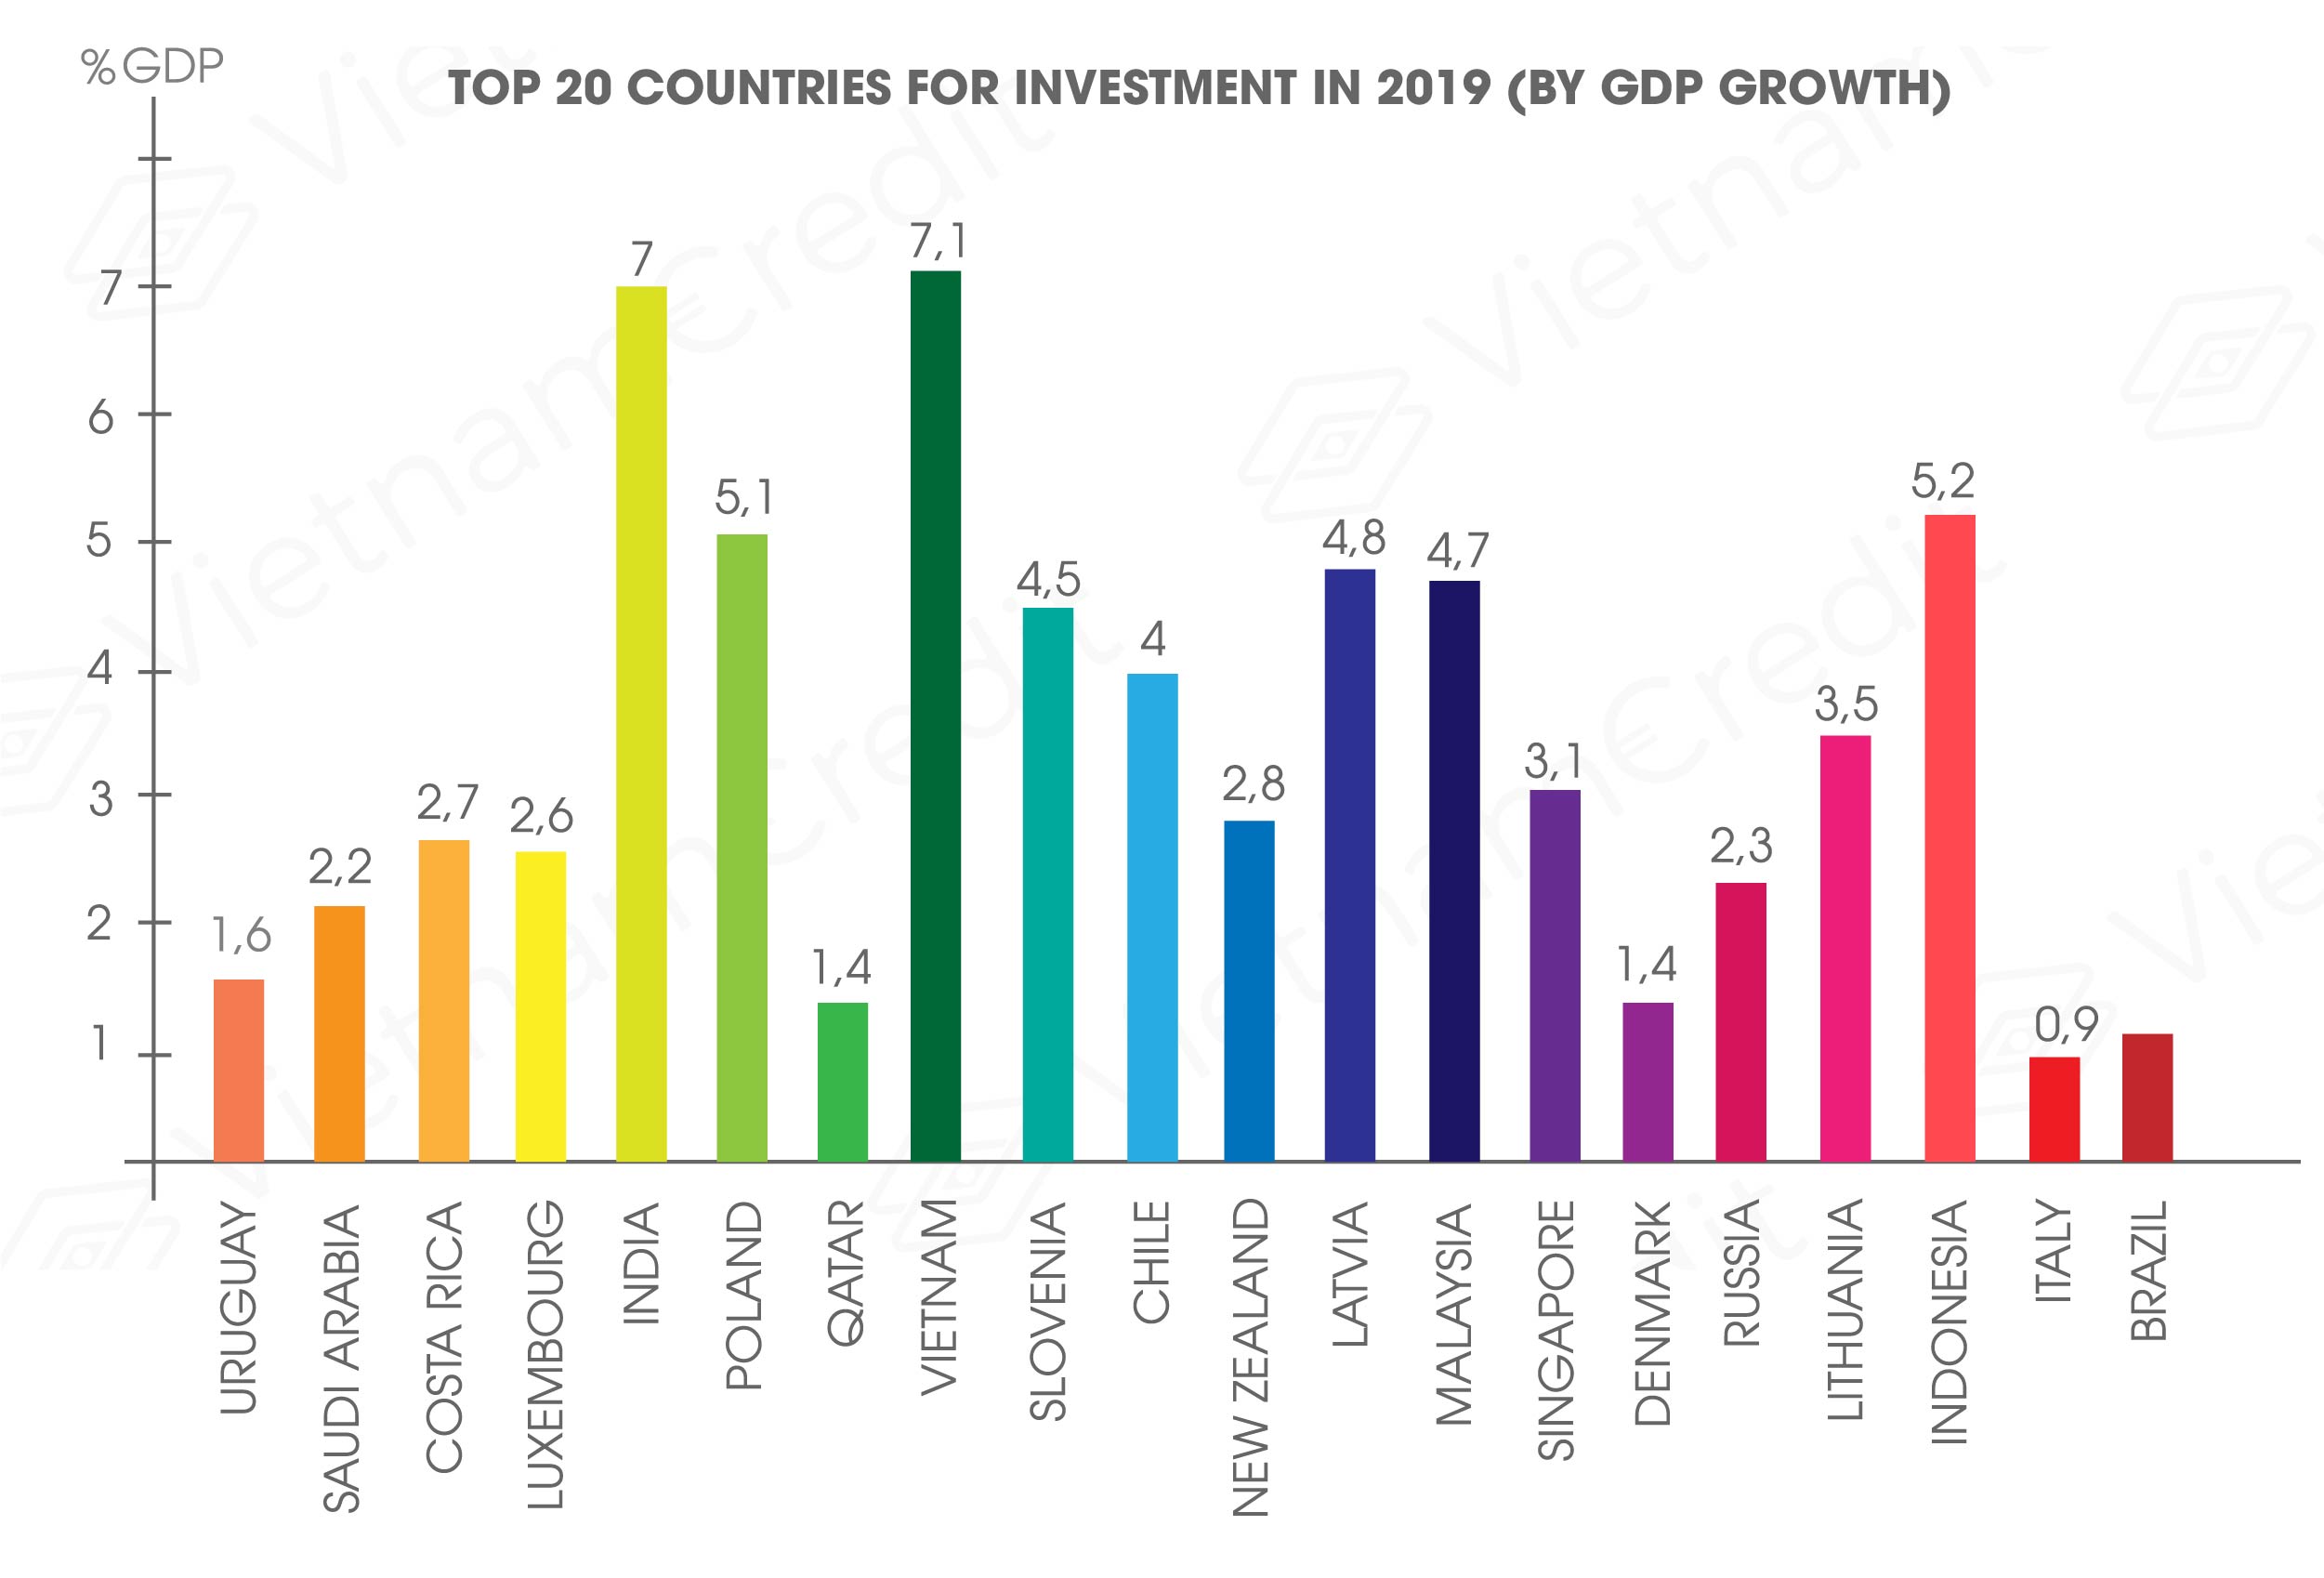 Vietnam: the 8th best countries for investment in 2019 1